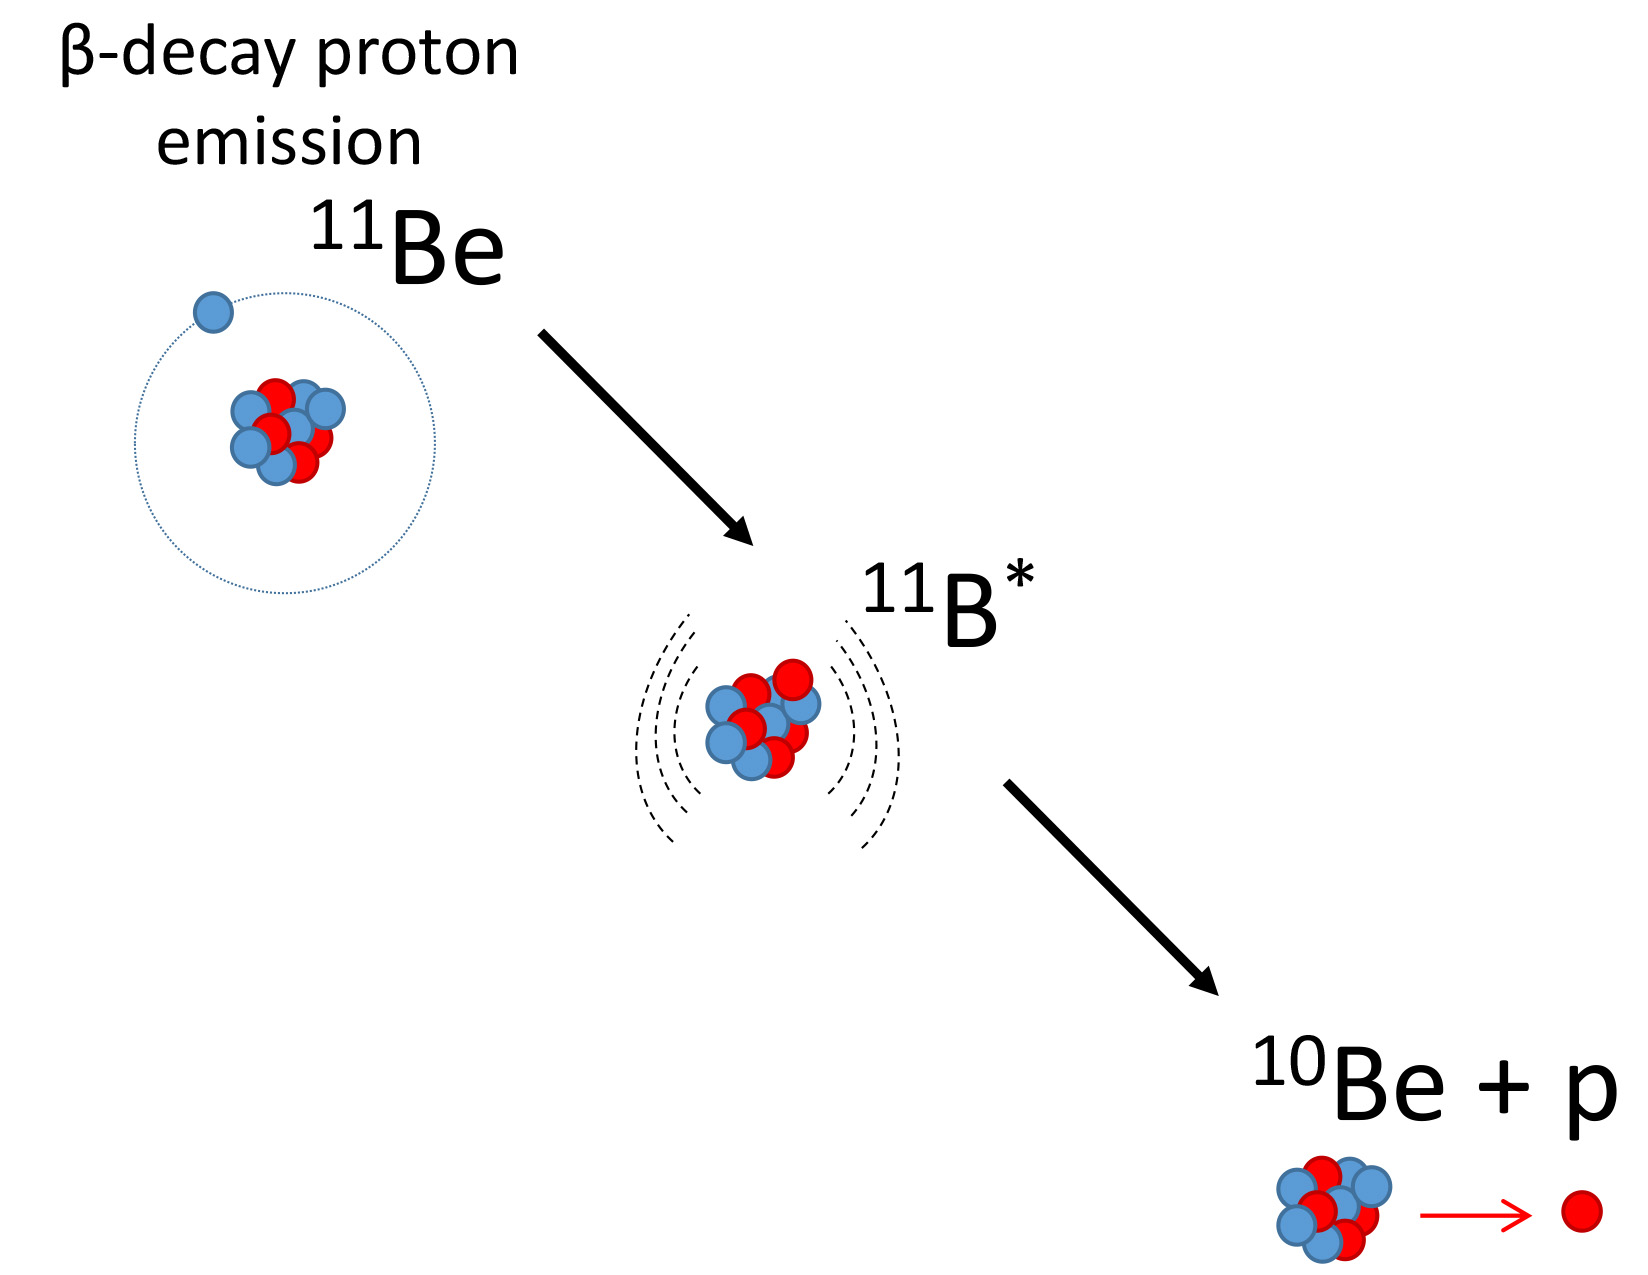 Three nuclei are shown as collections of blue orbs (neutrons) and red orbs (protons). A scheme shows beryllium-11â€™s core with 10 protons and neutrons being orbited by a single neutron, forming a halo nucleus. This nucleus goes through beta-decay proton emission, first becoming boron-11 (shown in an excited state denoted as 11B*), then beryllium-10 plus a proton.